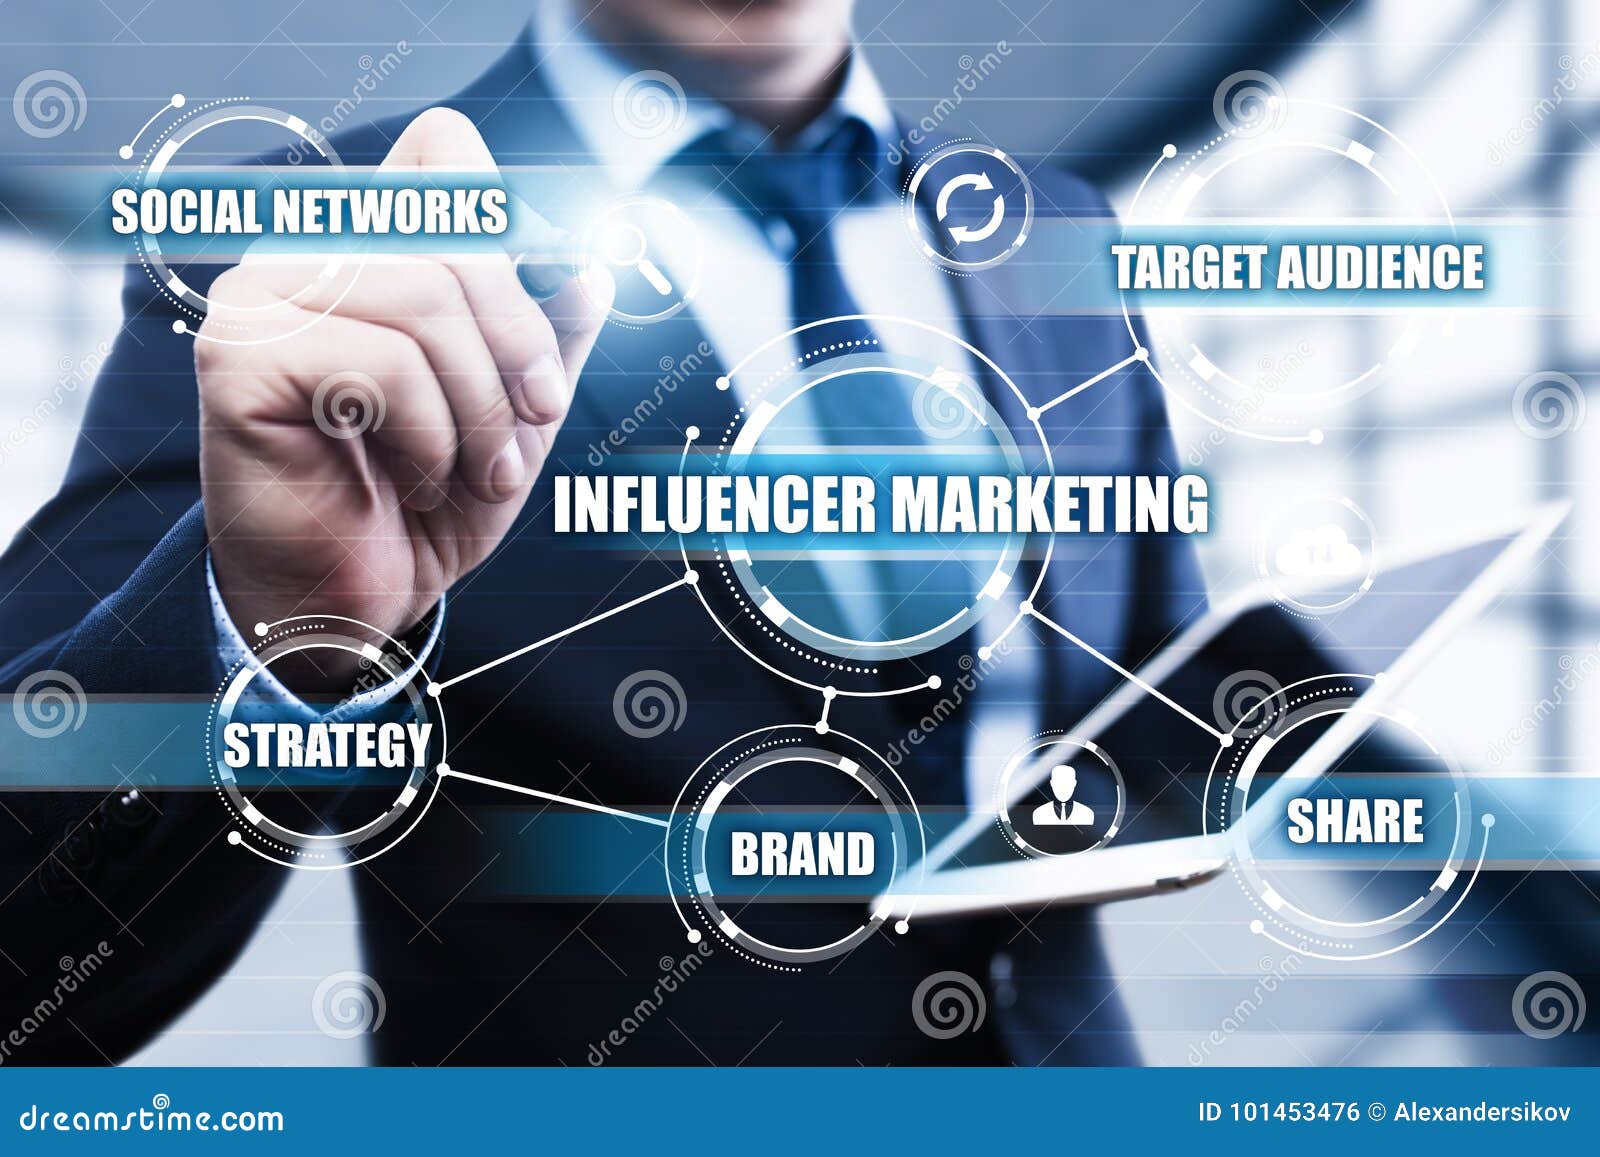 influencer marketing plan business network social media strategy concept